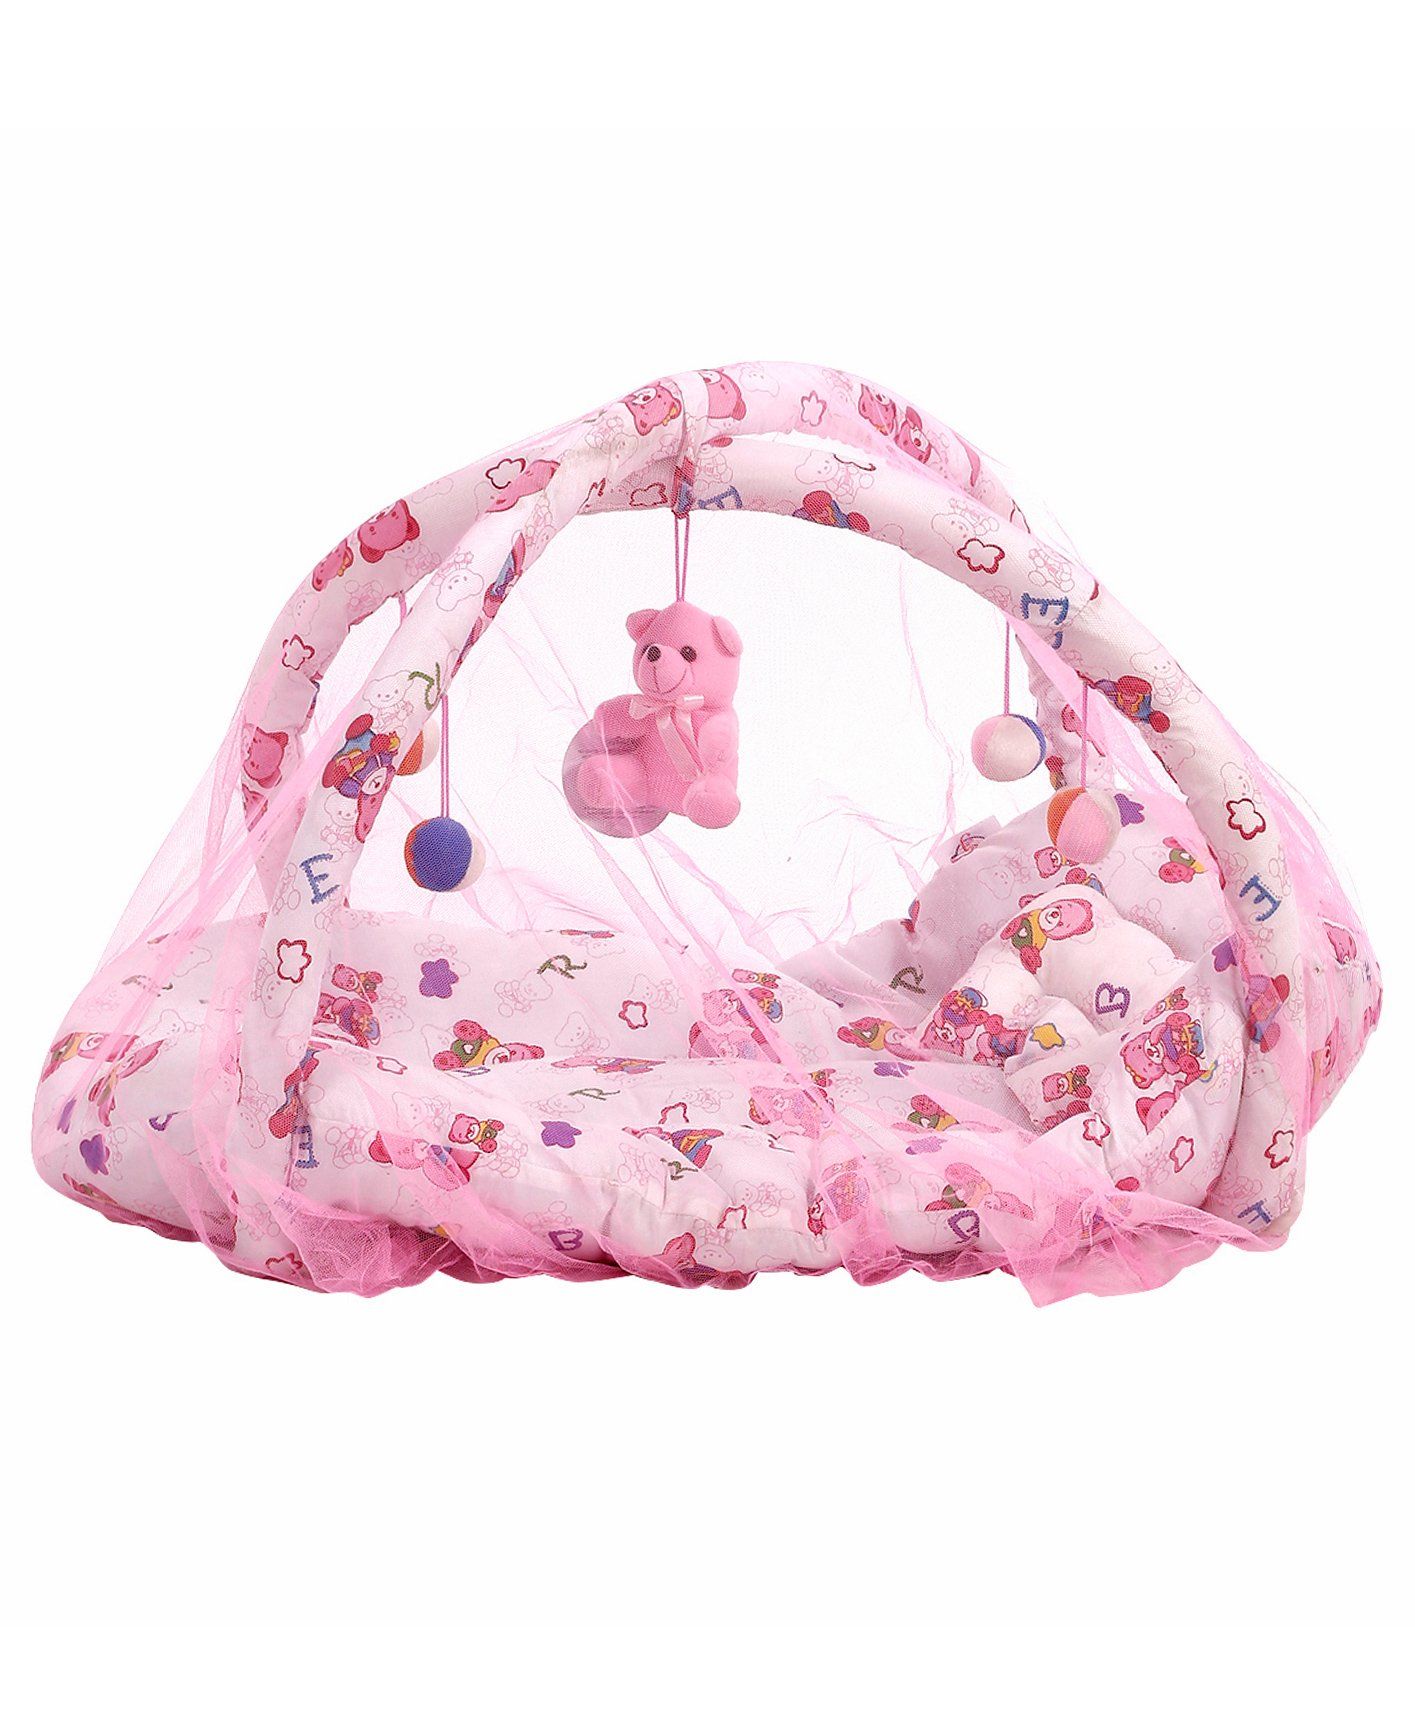 baby play gym with mosquito net